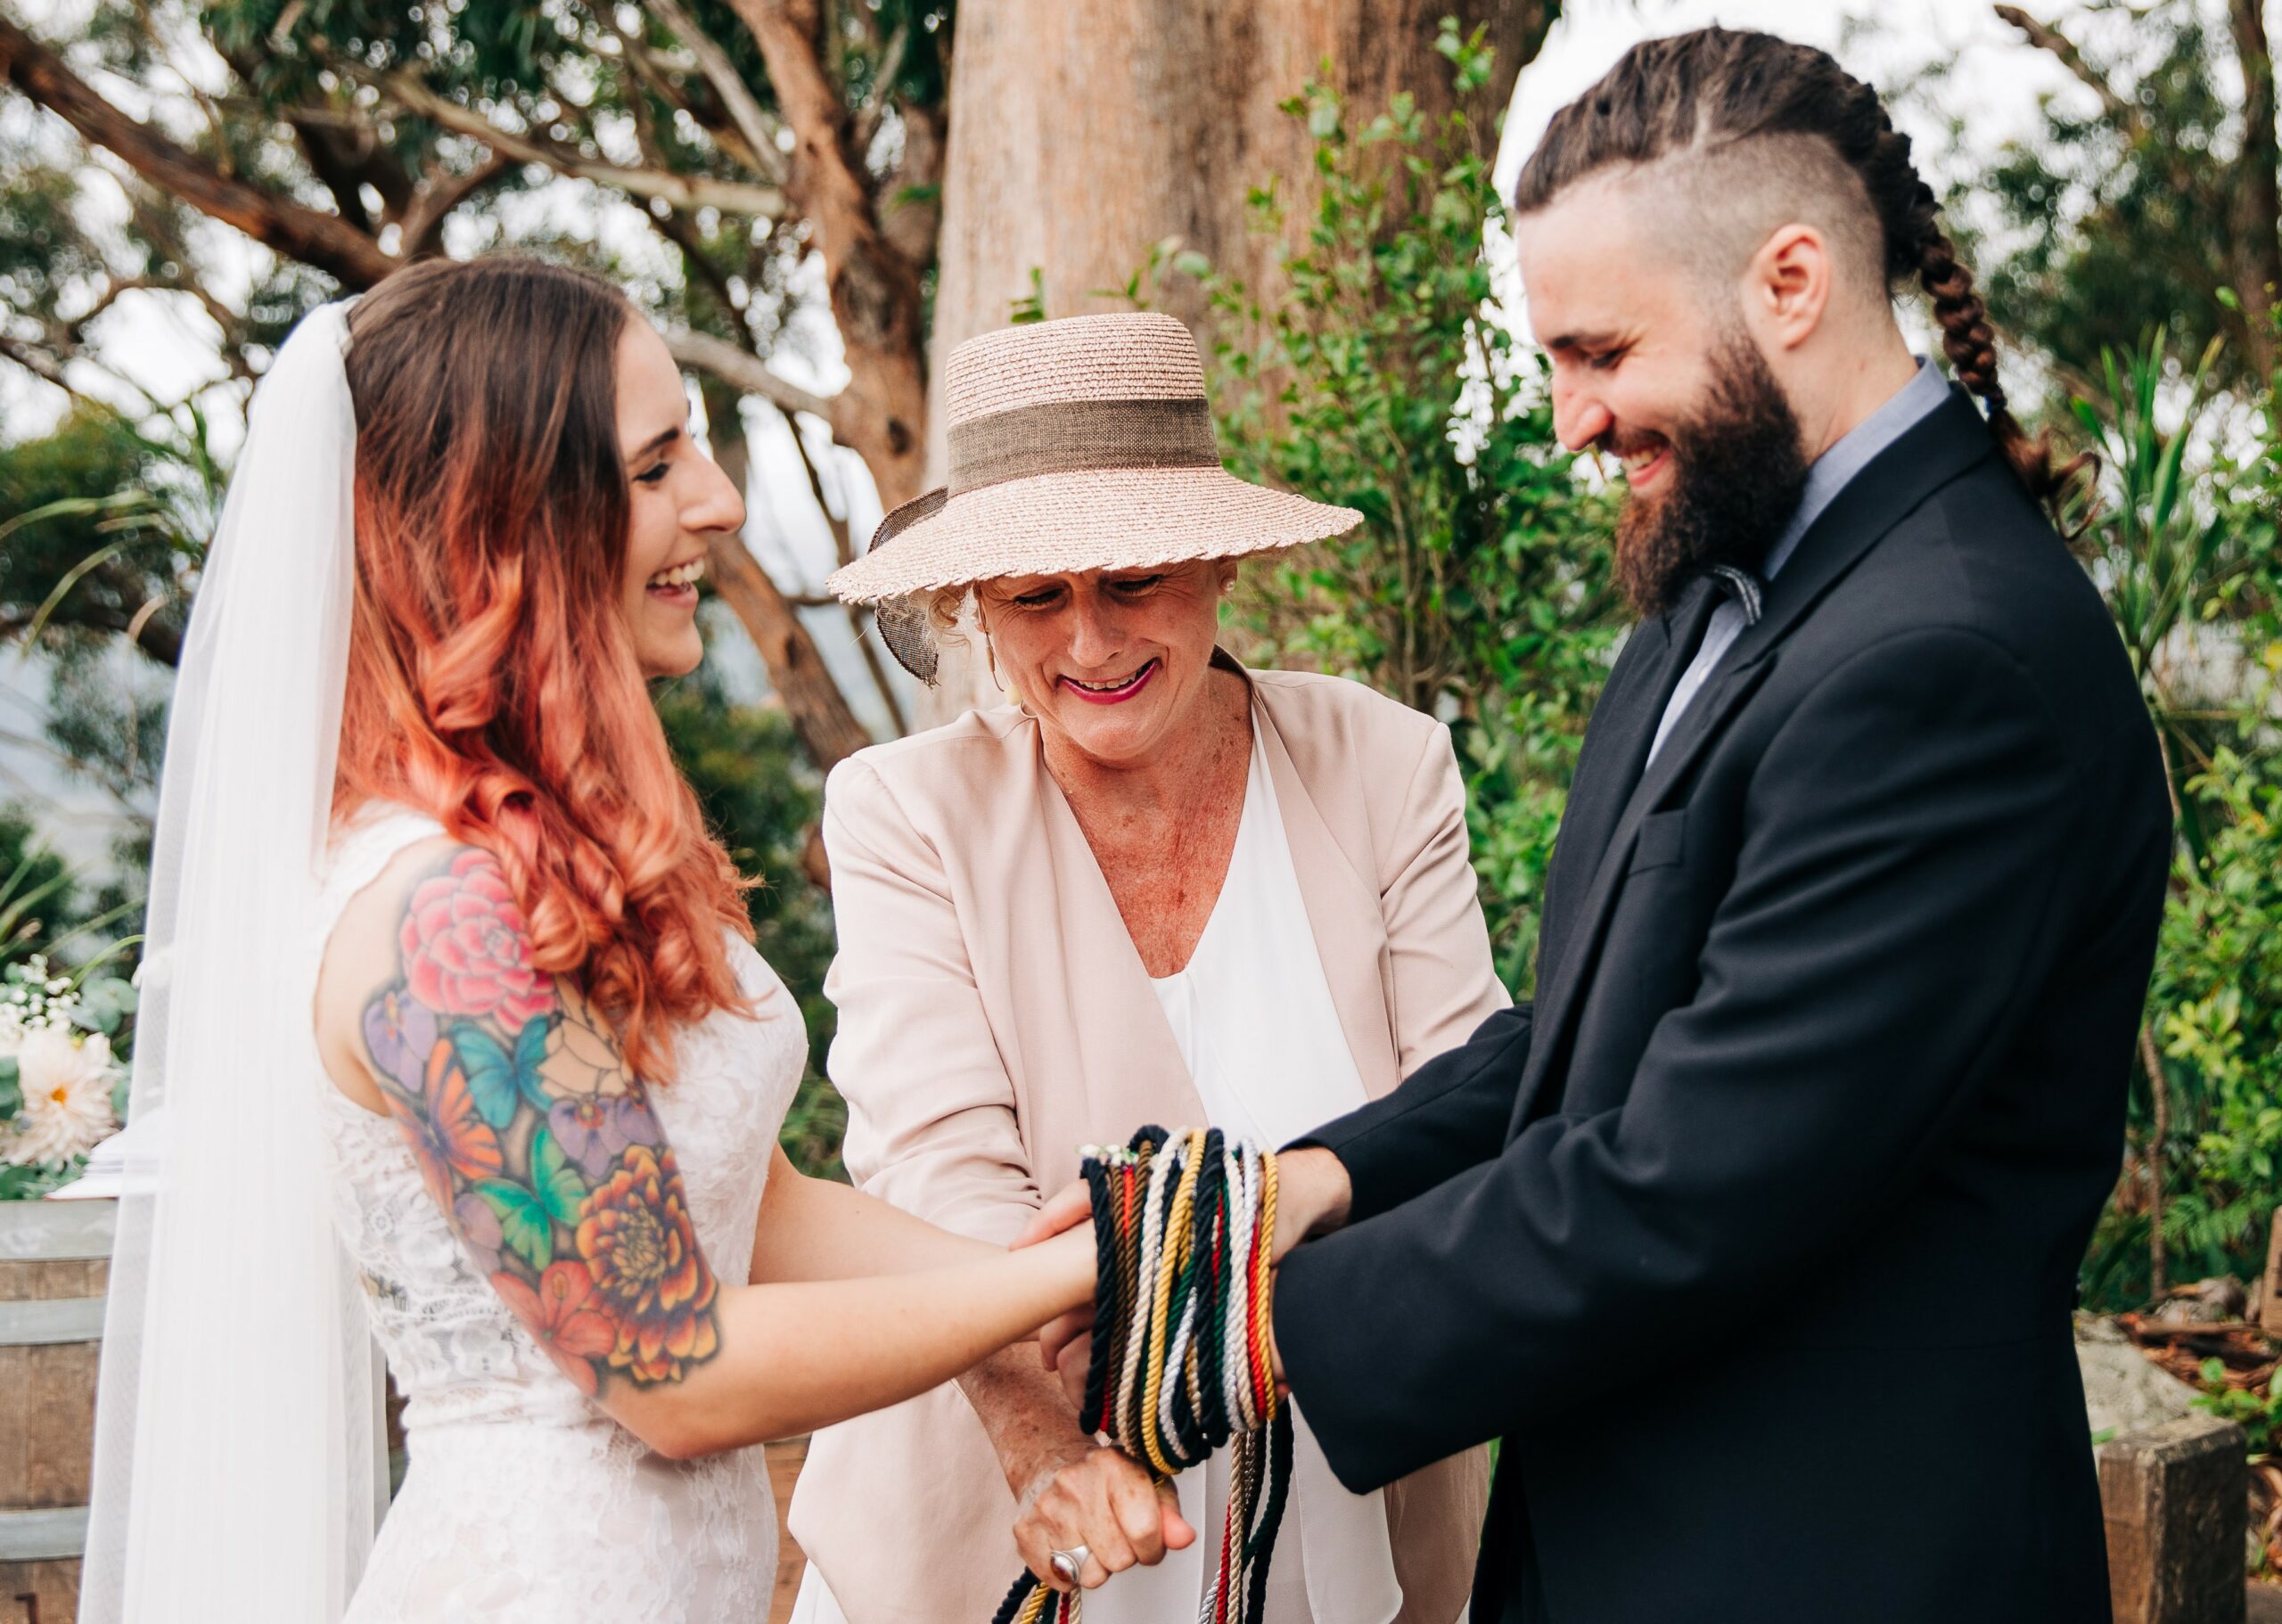 Tying the Knot: All About Handfasting Ceremonies